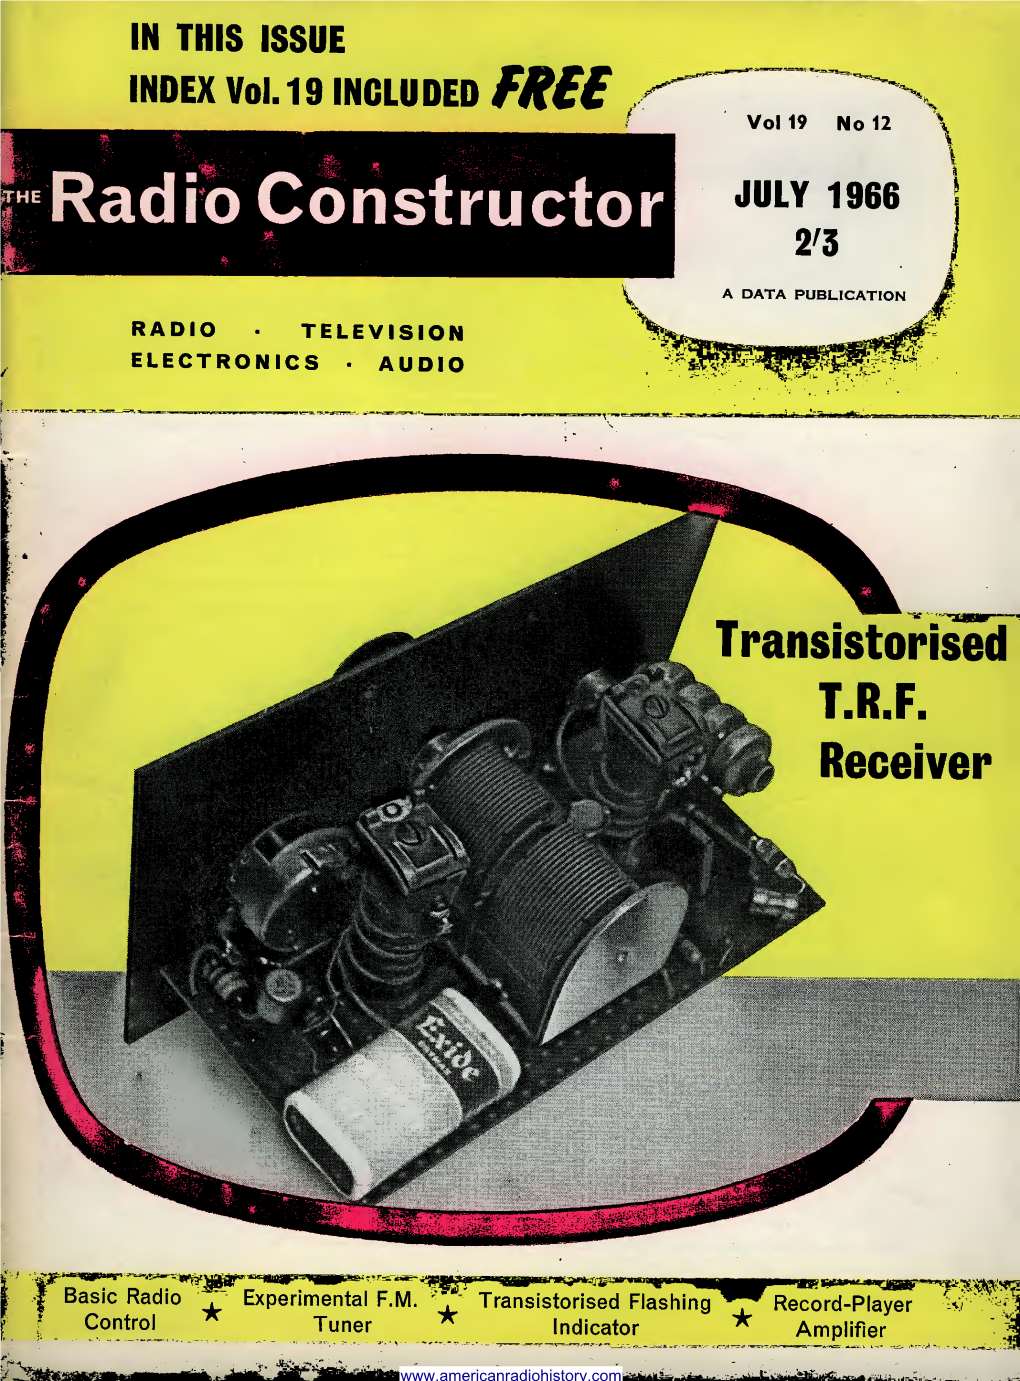 IN THIS ISSUE INDEX Vol.19 INCLUDED FR££ Radio Constructor RADIO TELEVISION ELECTRONICS AUDIO Vol 19 No 12 JULY 1966 2^3 A